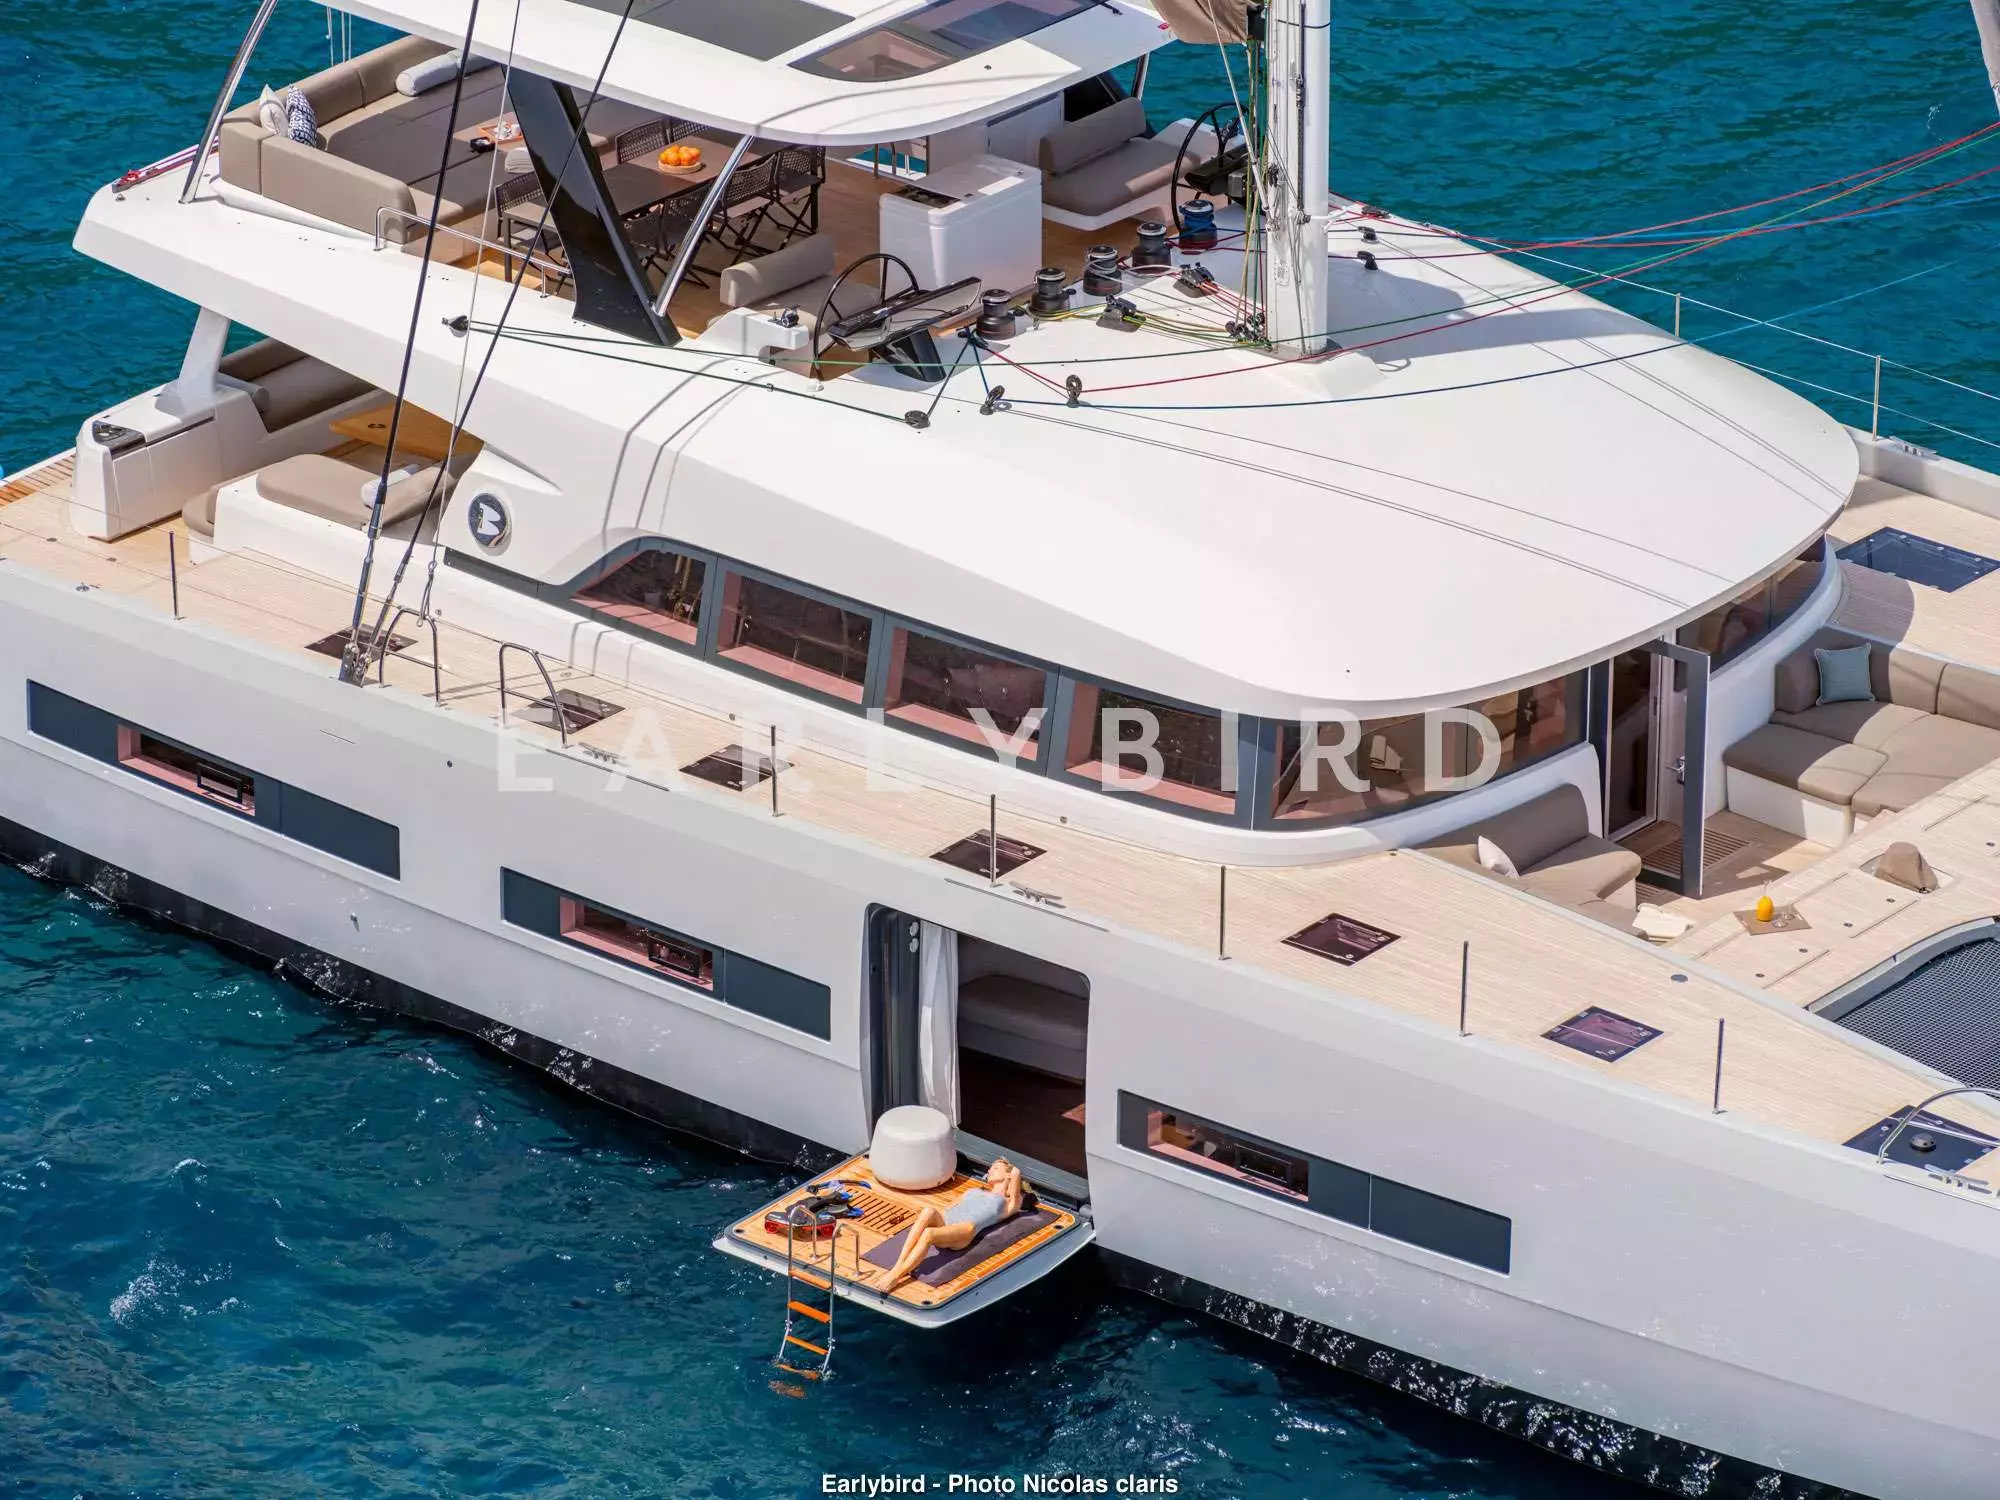 Earlybird by Lagoon - Top rates for a Charter of a private Luxury Catamaran in Anguilla